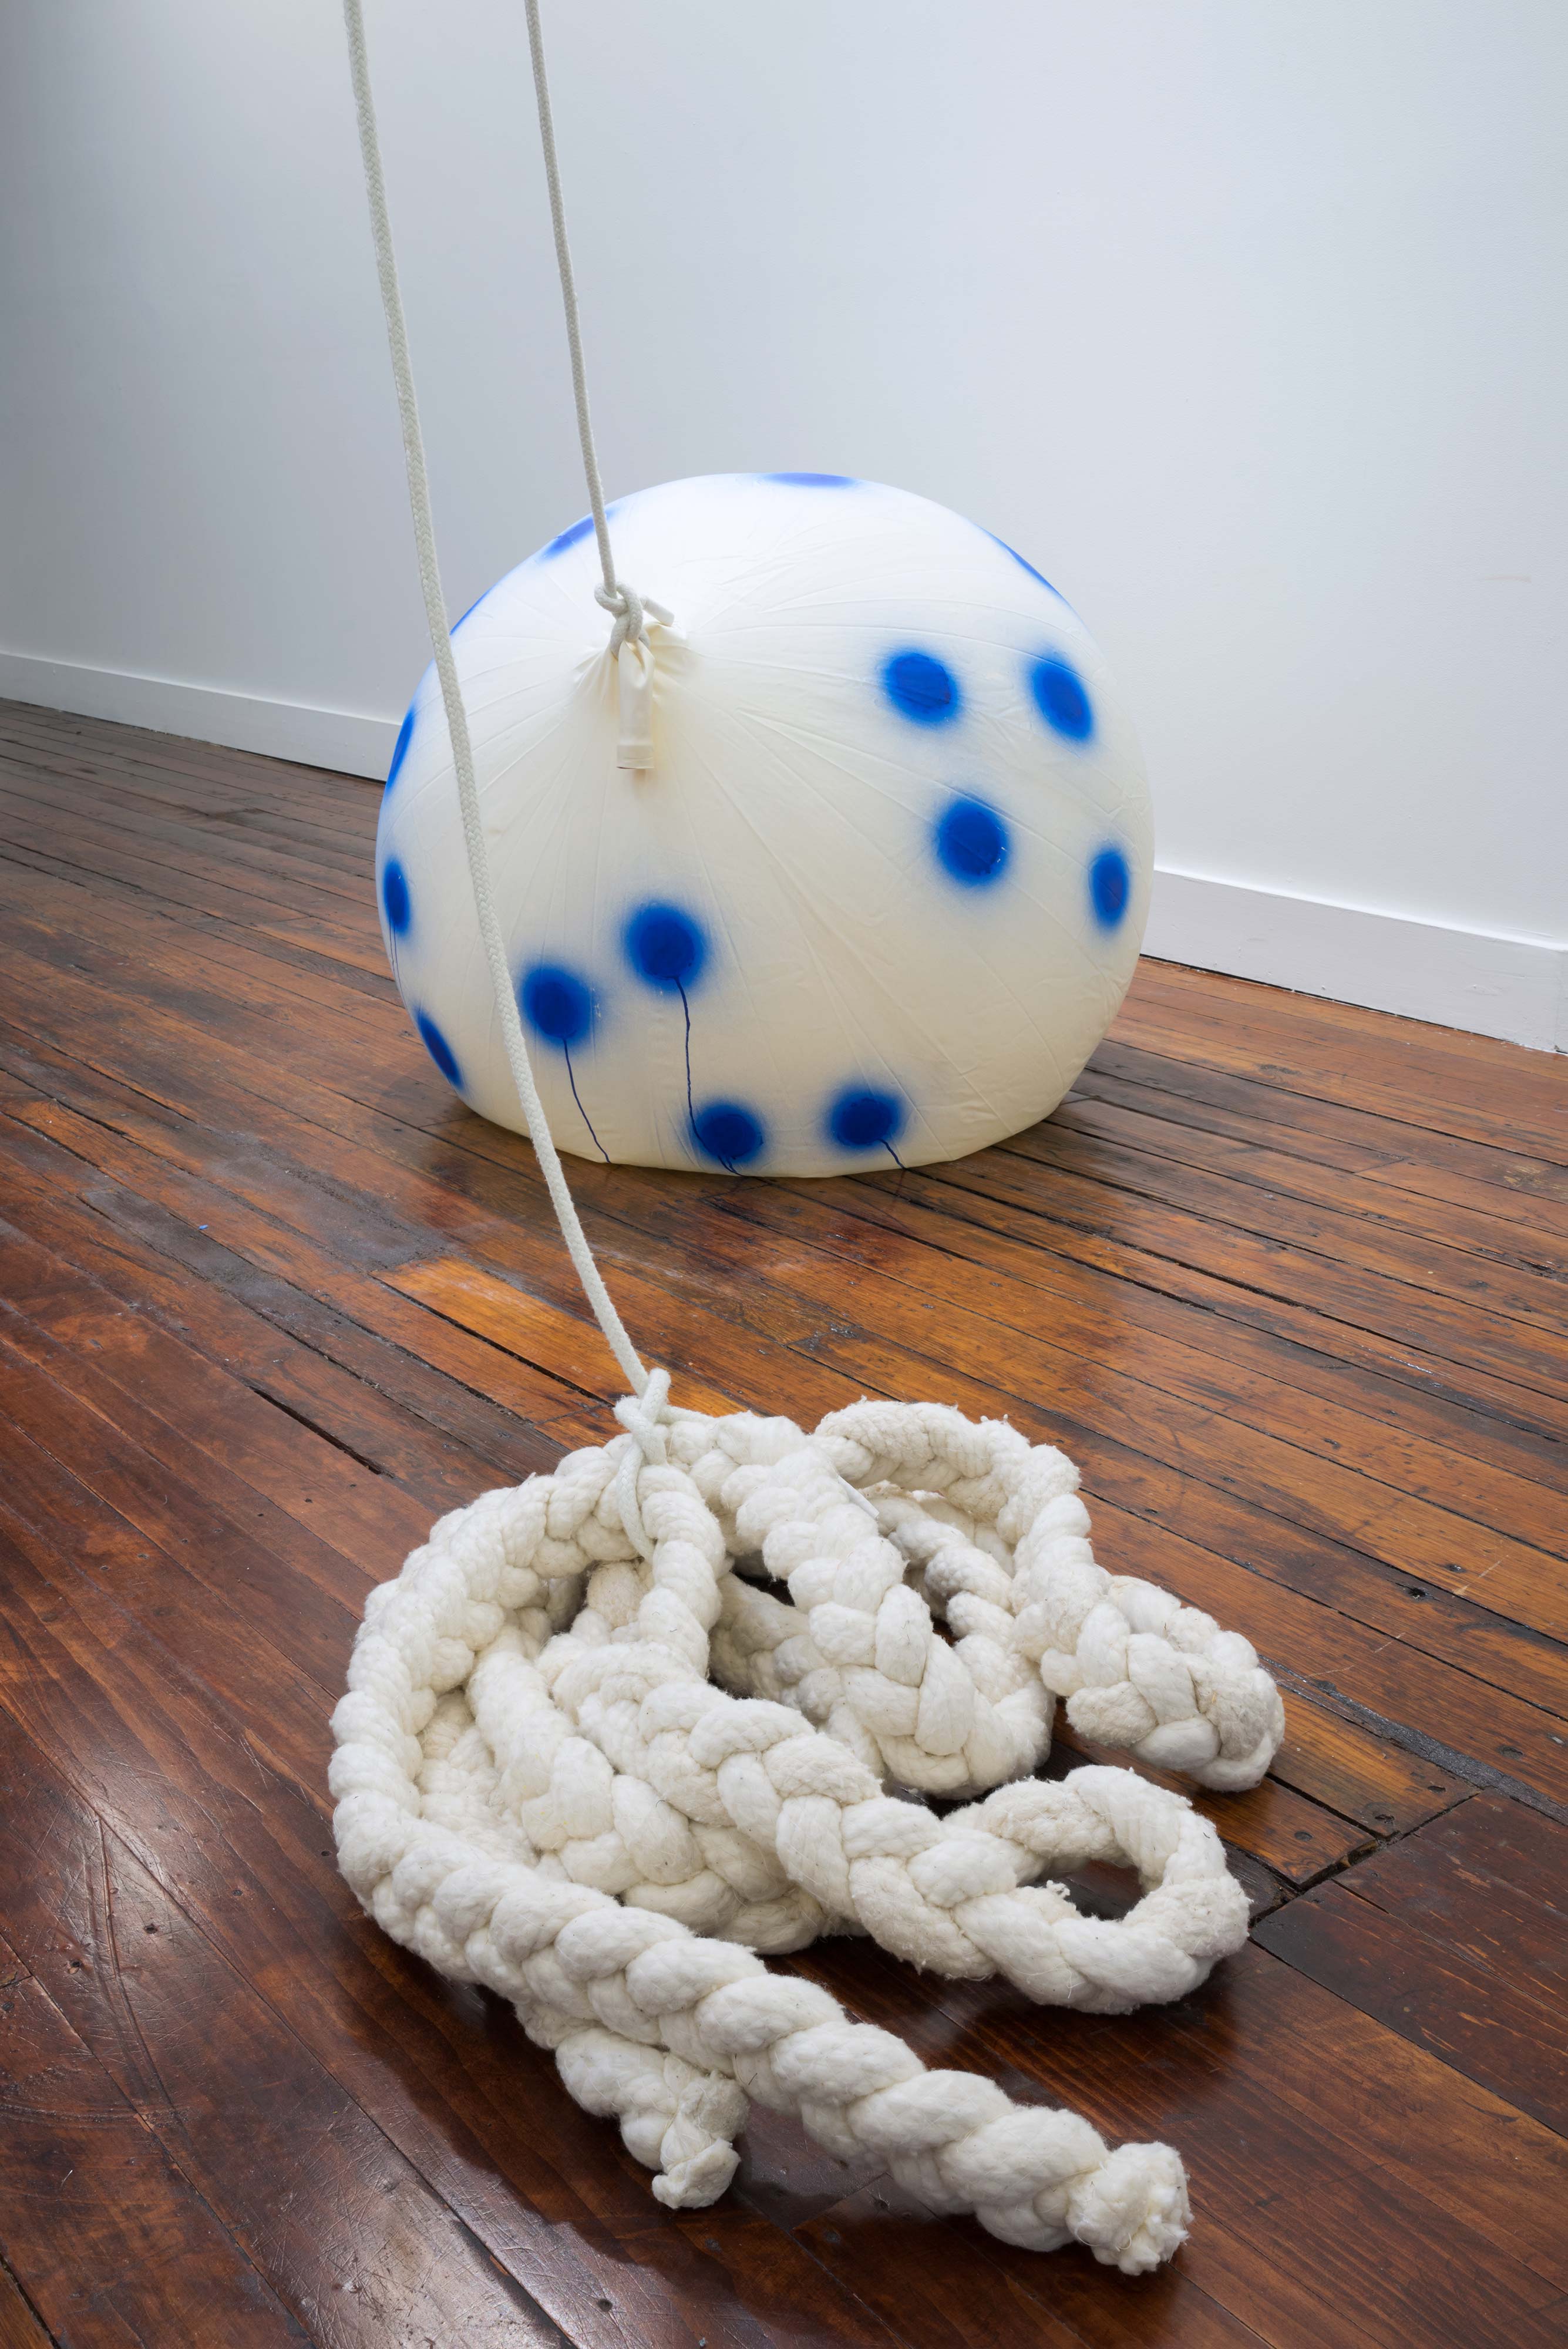 Nancy Davidson<br>Fallen Cloud (III)<br>1997-2016<br>latex, rope, paint, cotton<br>36 x 36 in (91 x 91 cm), height variable